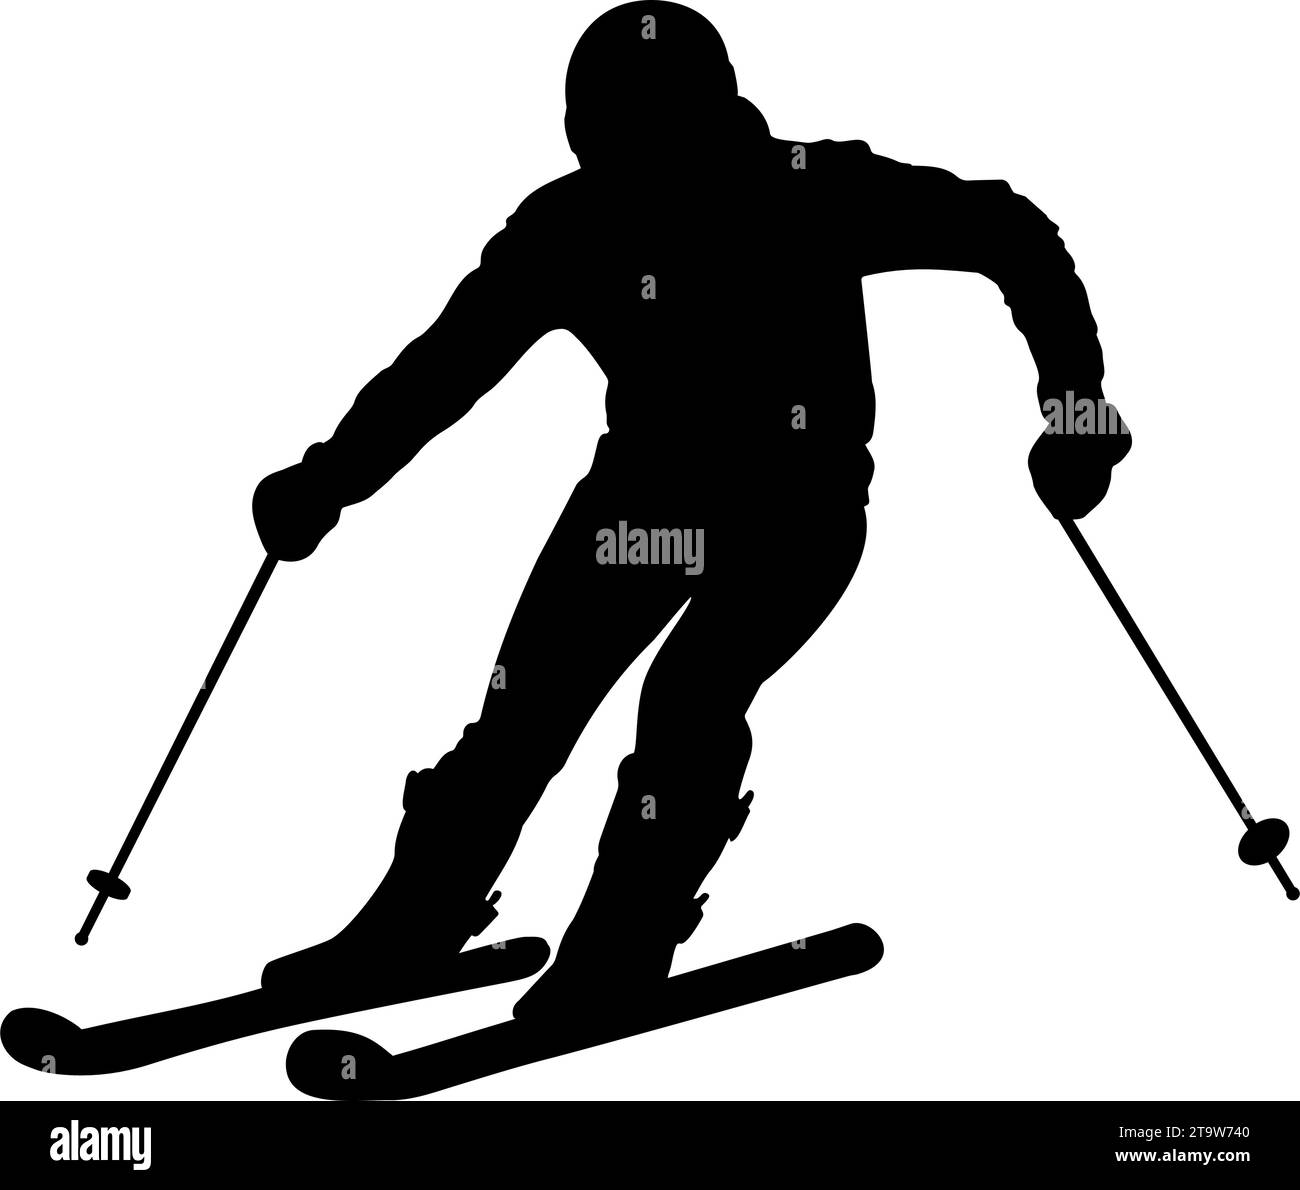 Male Skier in action silhouette. Vector illustration Stock Vector